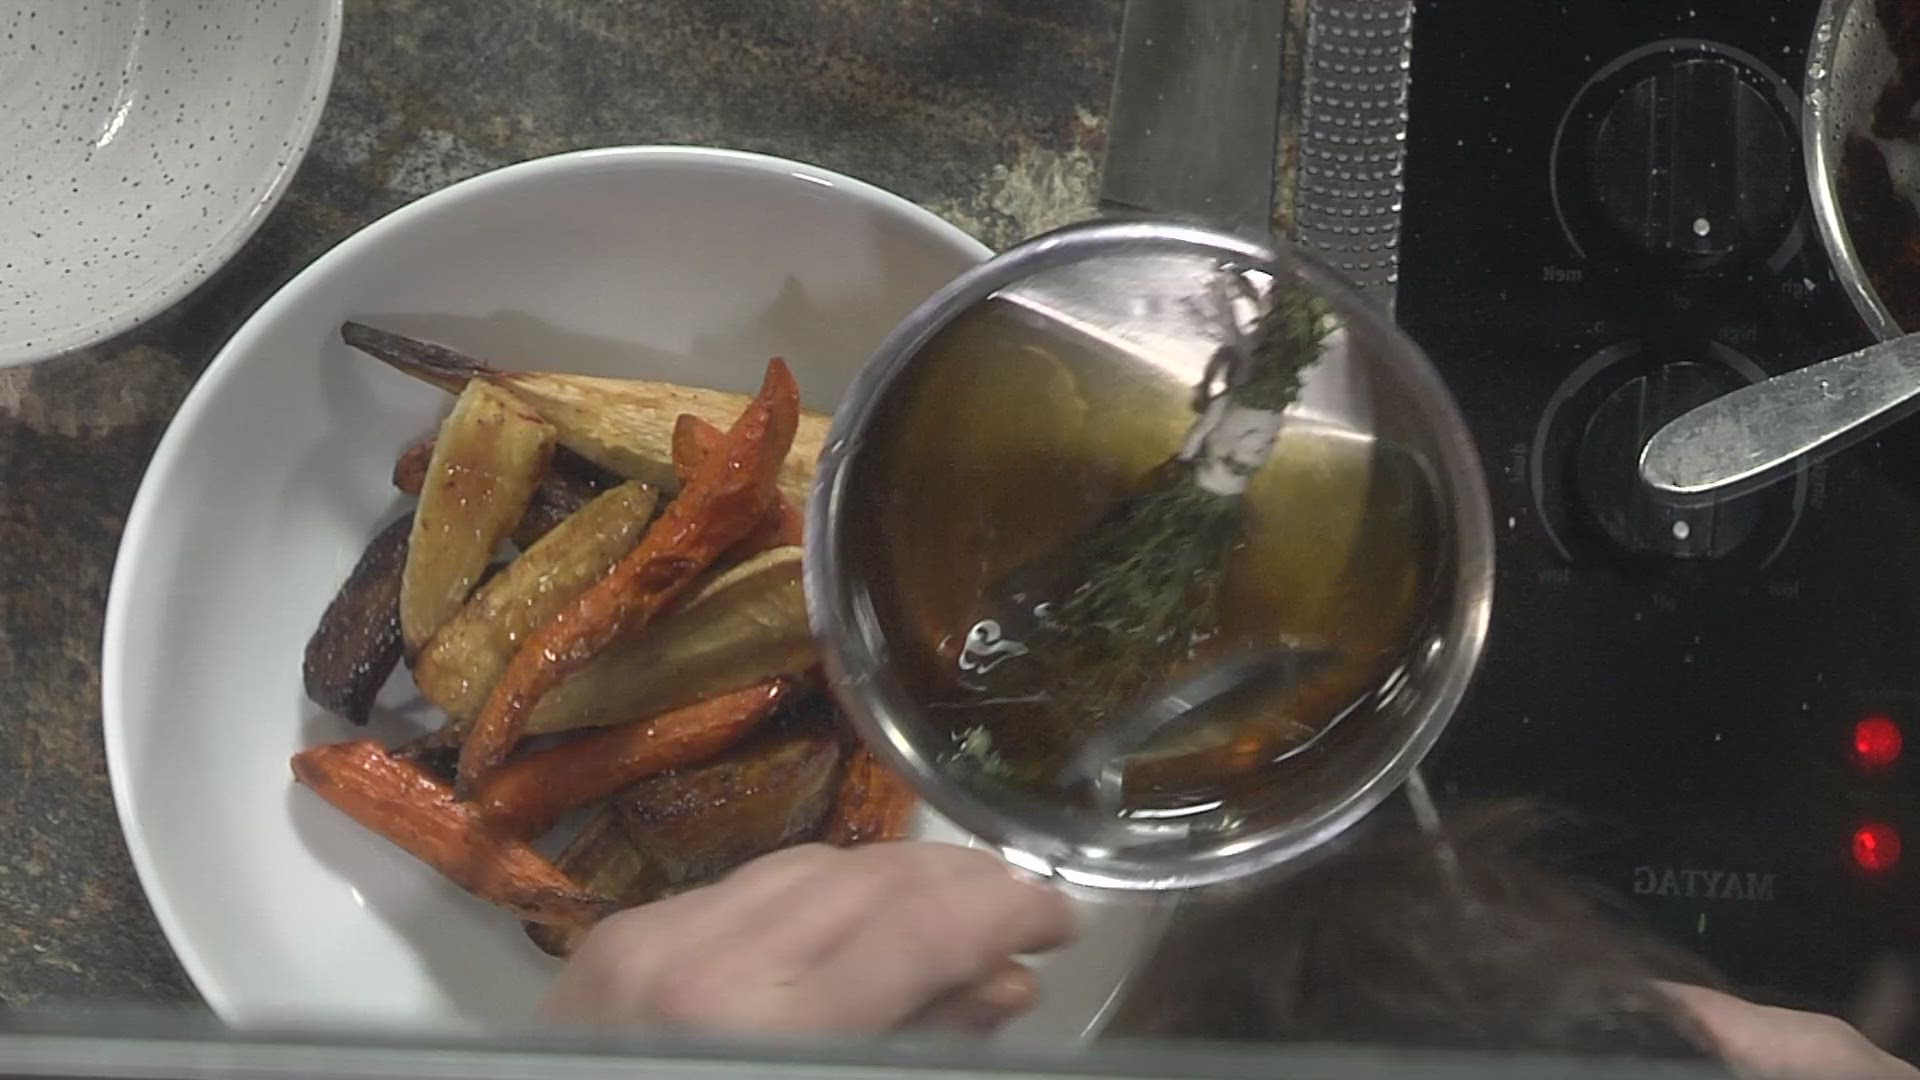 Chef Trevor Stockton with RT Lodge shows us two Thanksgiving Day sides to impress your family.